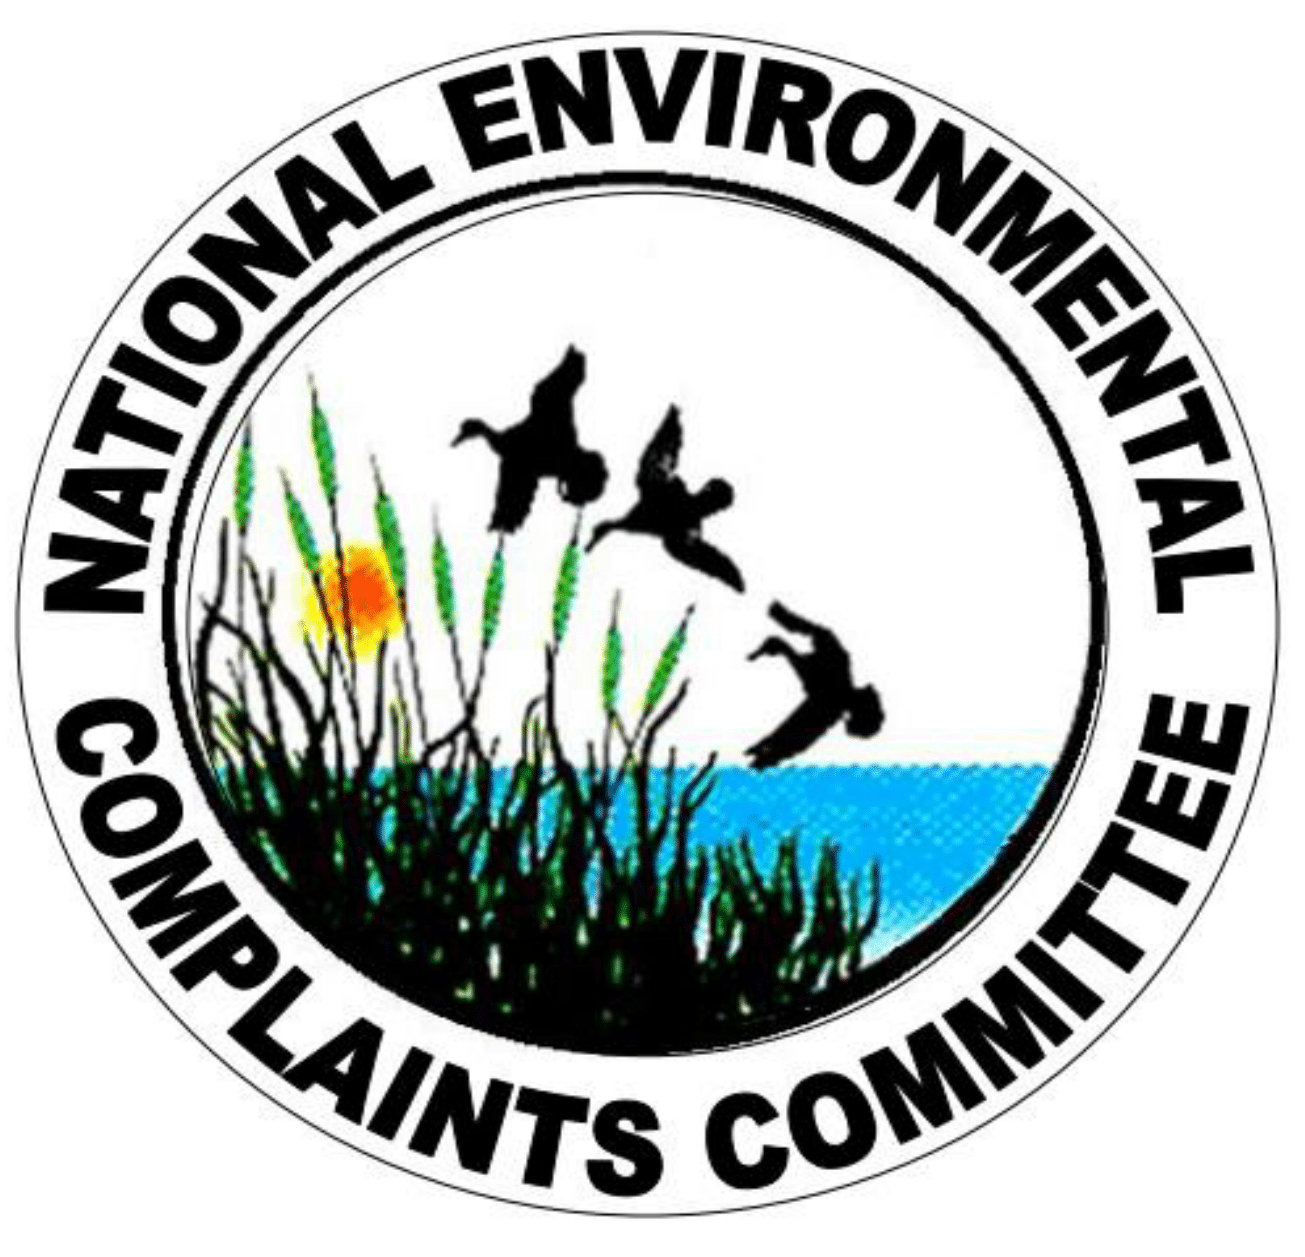 National Environmental Complaints Committee (NECC)